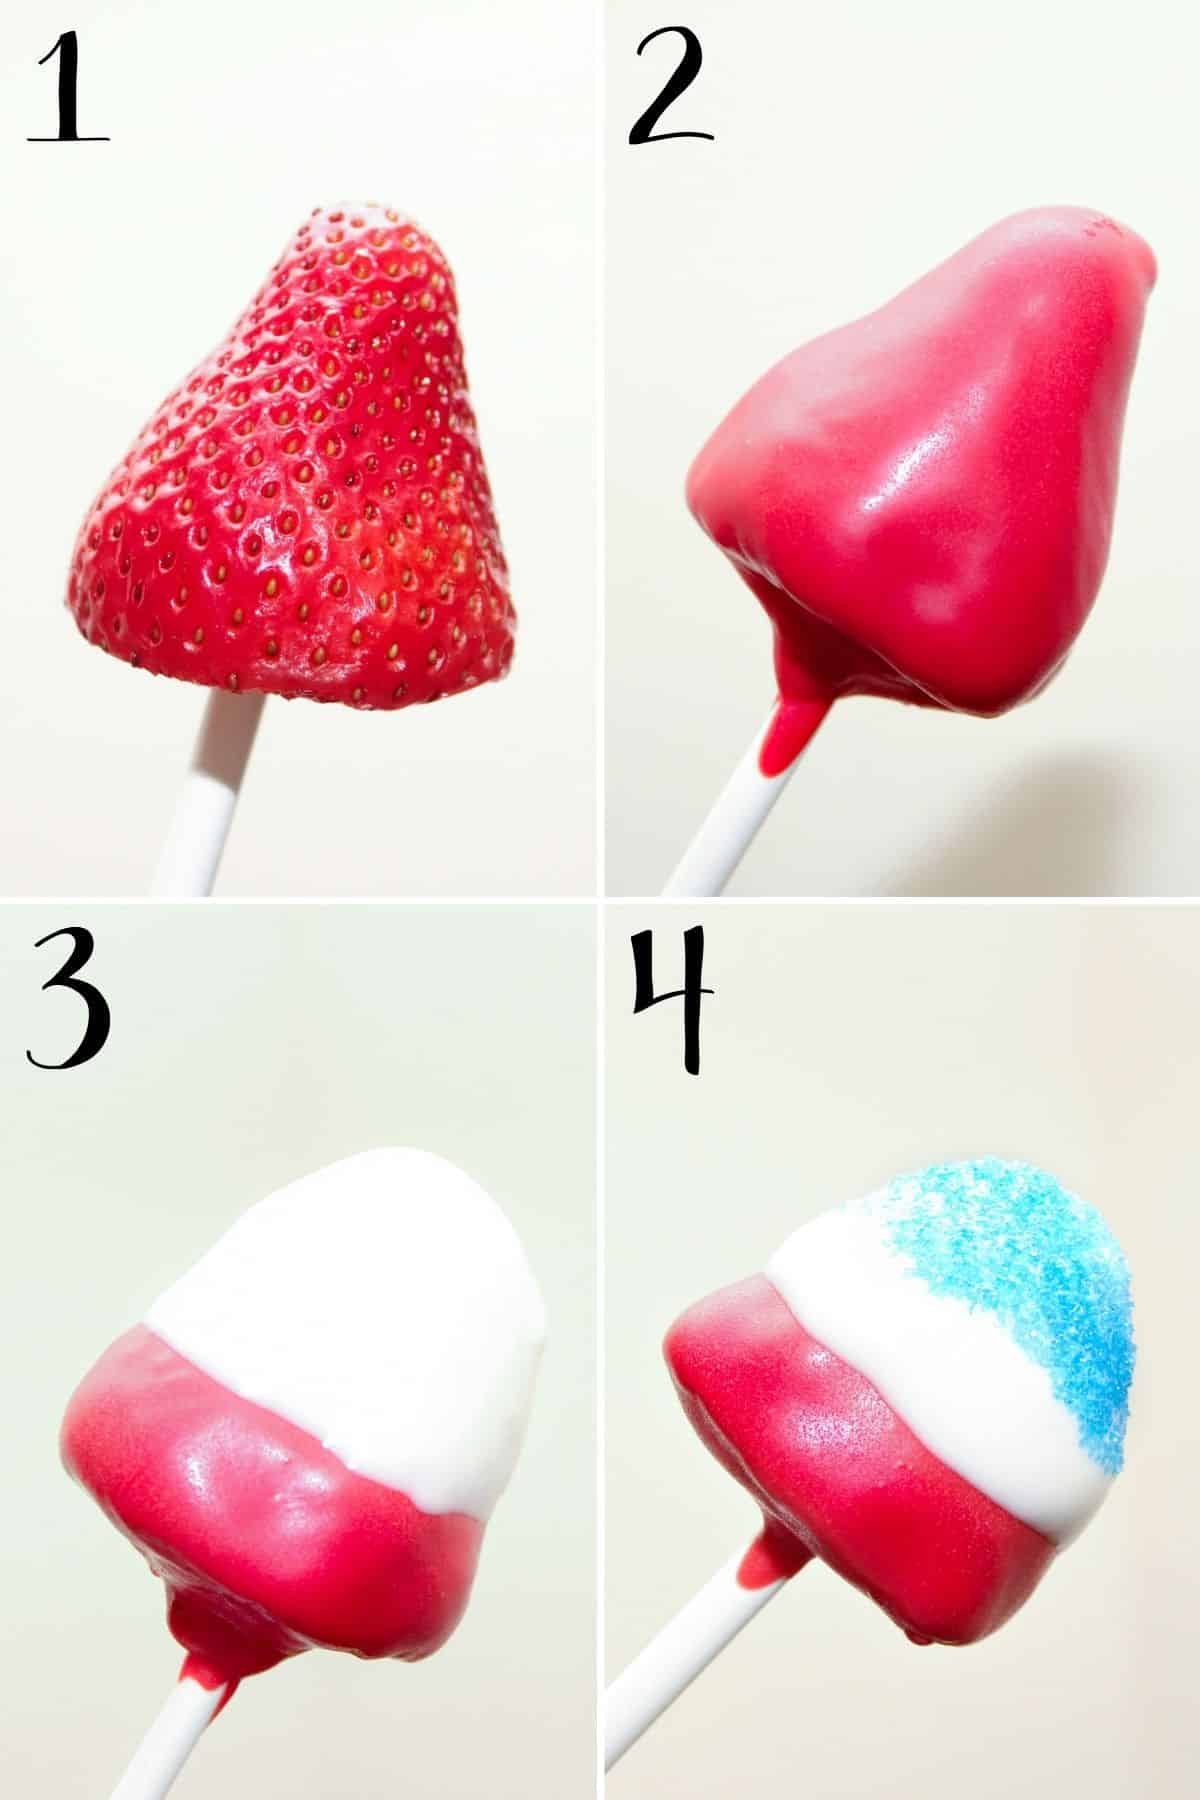 How to dip strawberries for 4th of july: first put on stick, then dip in red candy melts, followed by white, then dip in blue sanding sugar.